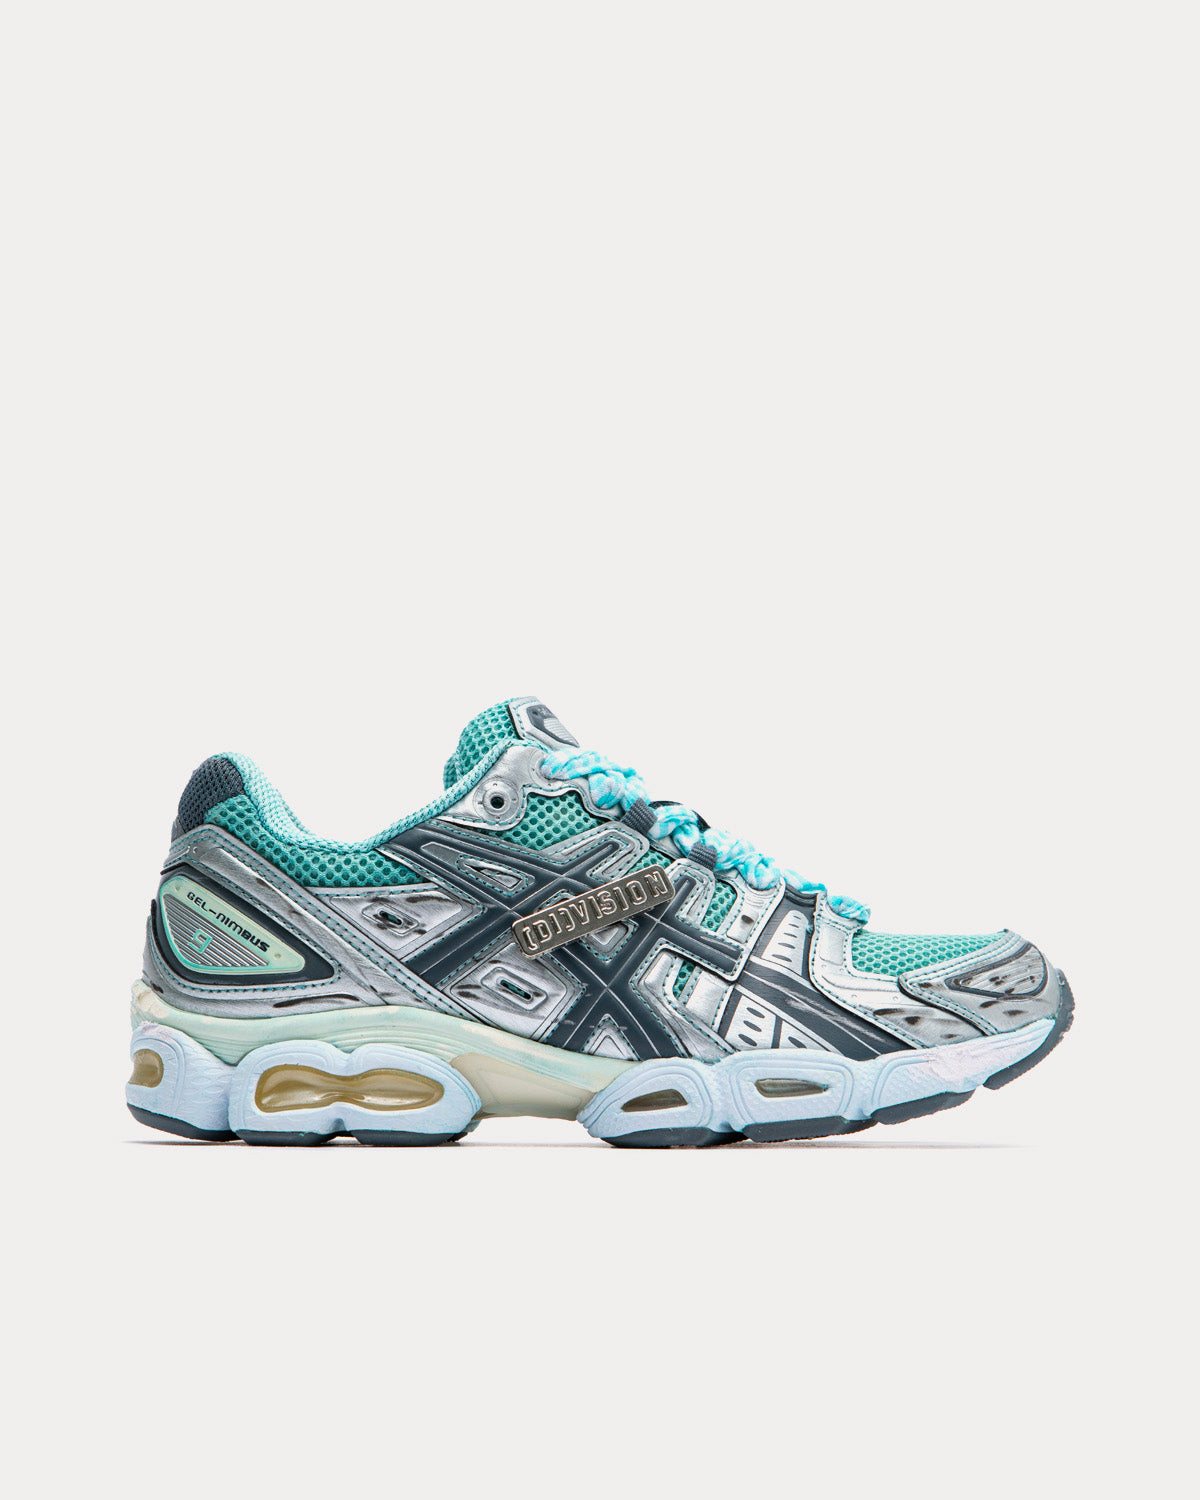 Asics x (di)vision - GEL-Nimbus 9 Checked Turquoise / Silver Low Top Sneakers